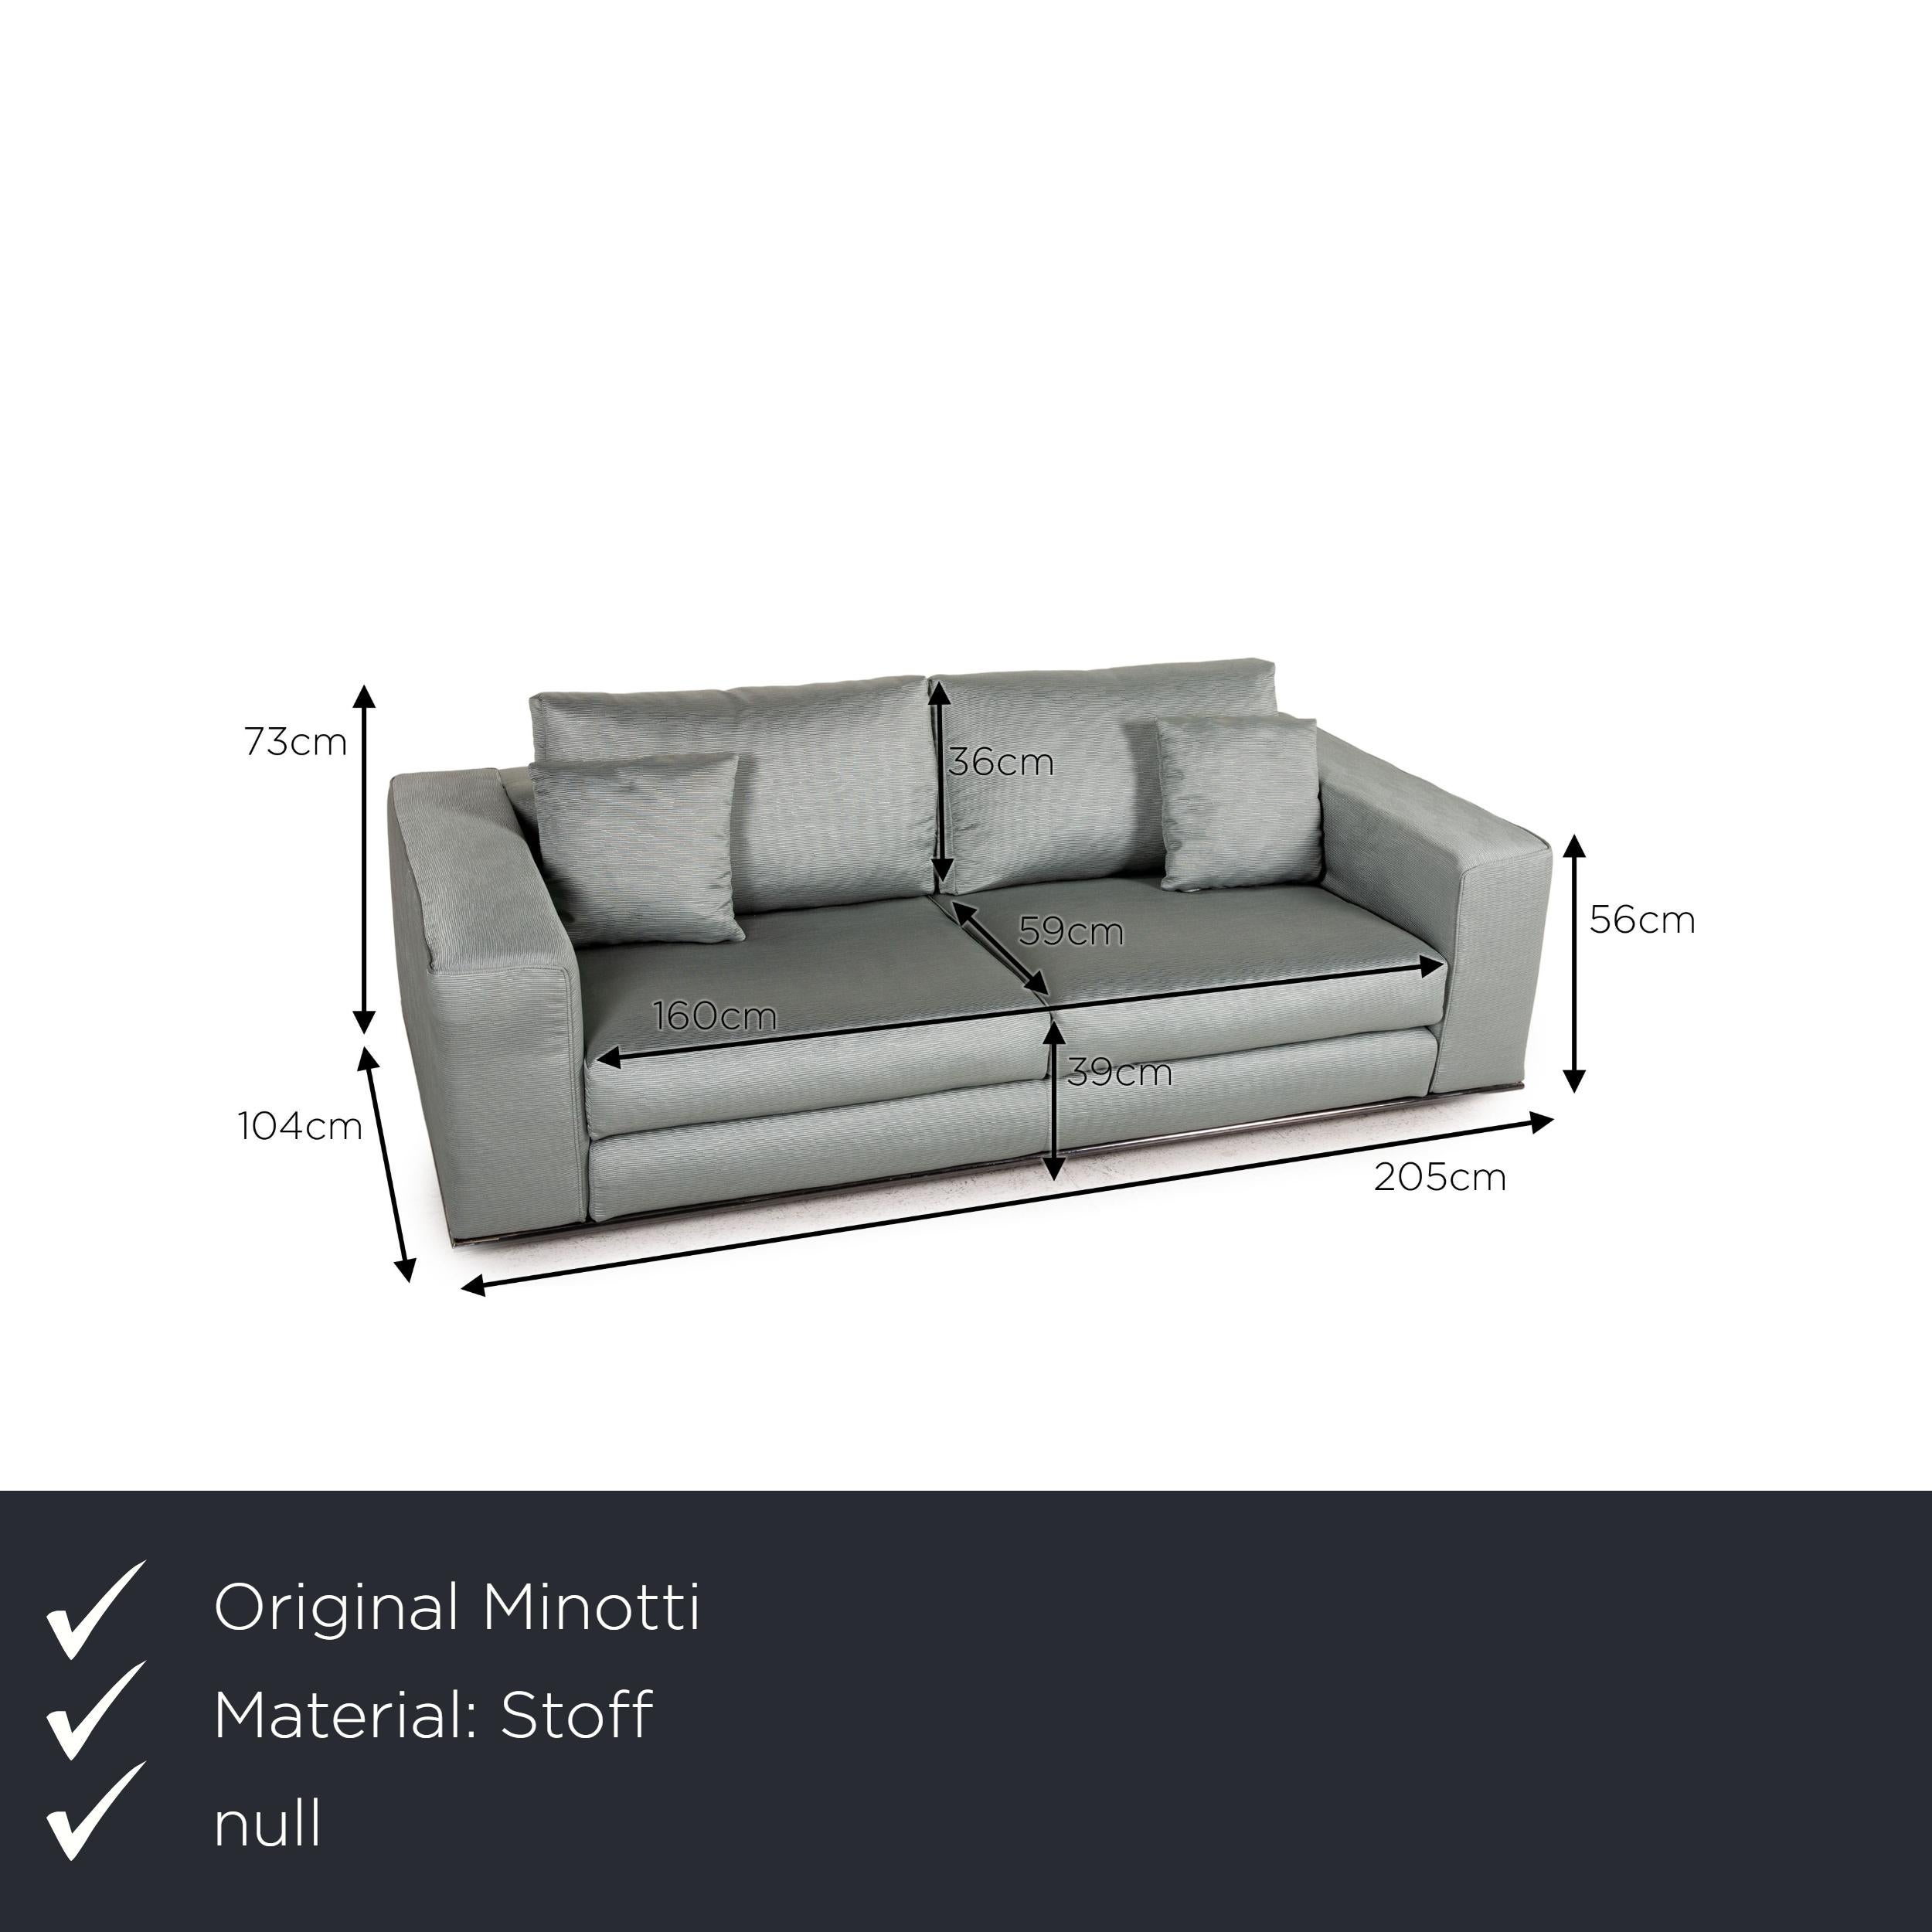 We present to you a Minotti Hamilton fabric sofa set green 2x two-seater.
 SKU: #17039
 

 Product measurements in centimeters:
 

 depth: 104
 width: 205
 height: 73
 seat height: 39
 rest height: 56
 seat depth: 59
 seat width: 160
